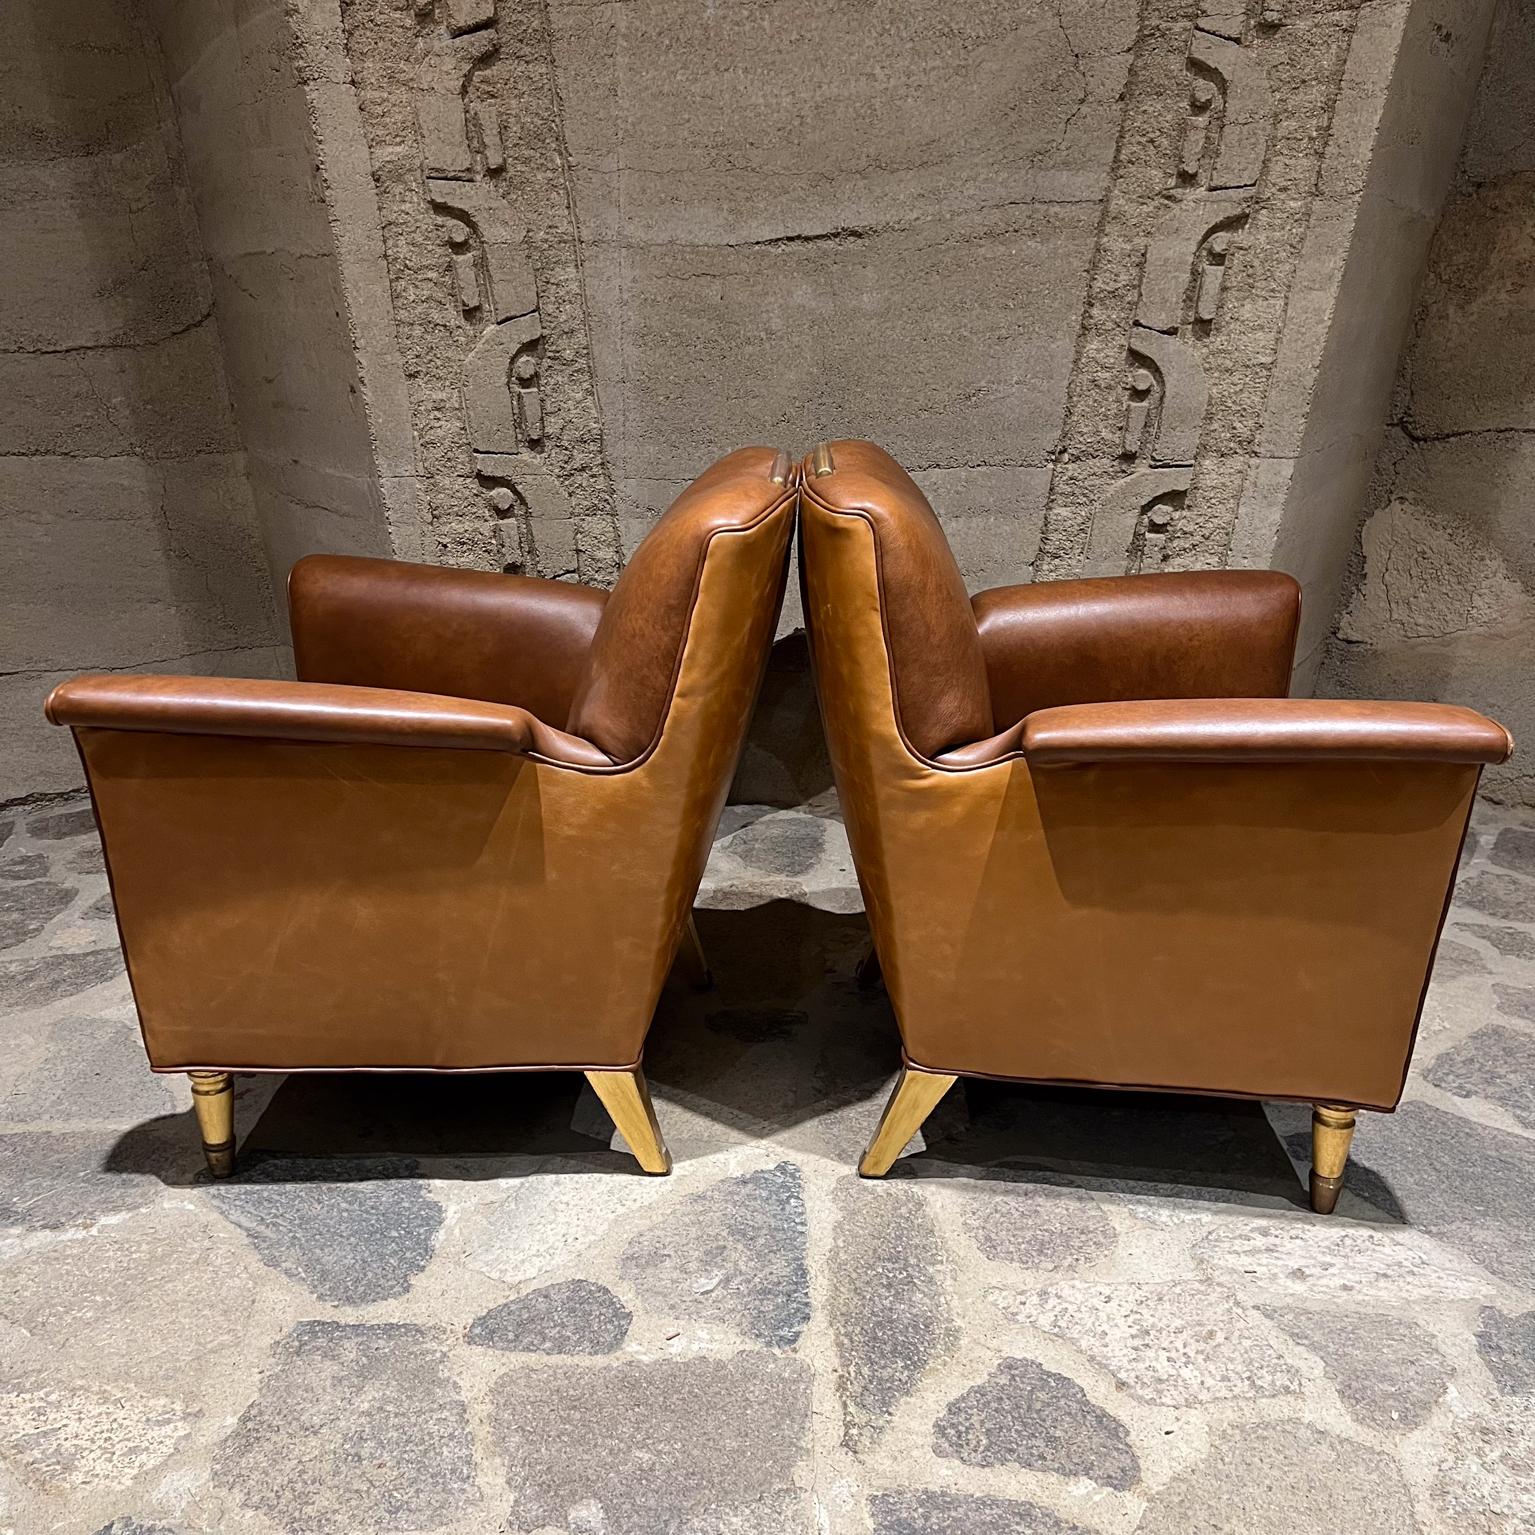 1950s Octavio Vidales Chairs Leather and Mahogany Mexico City For Sale 3